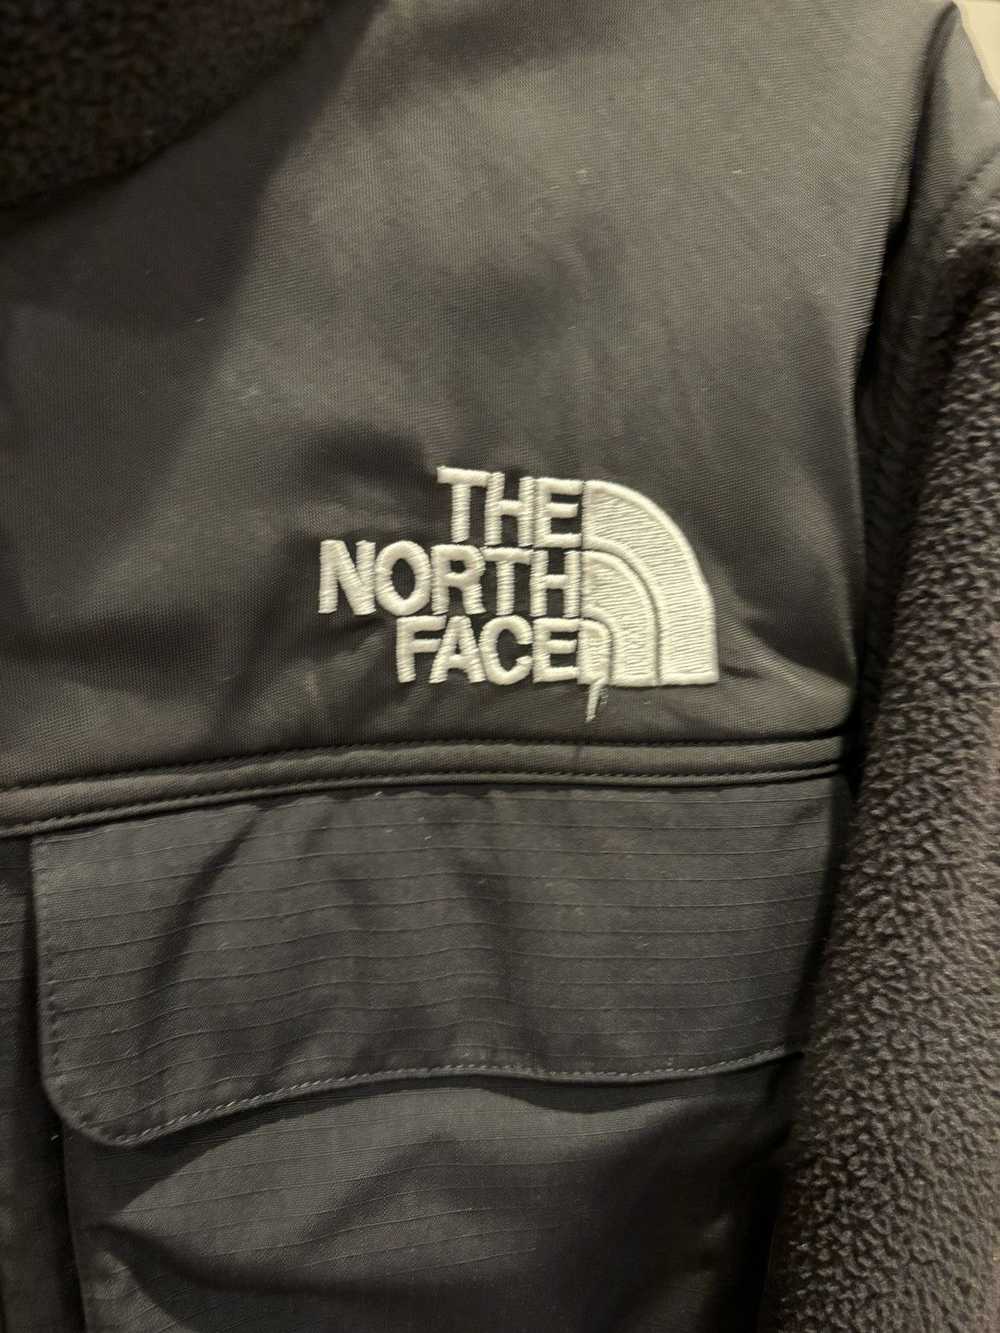 Supreme Supreme The North Face Expedition Fleece - image 5